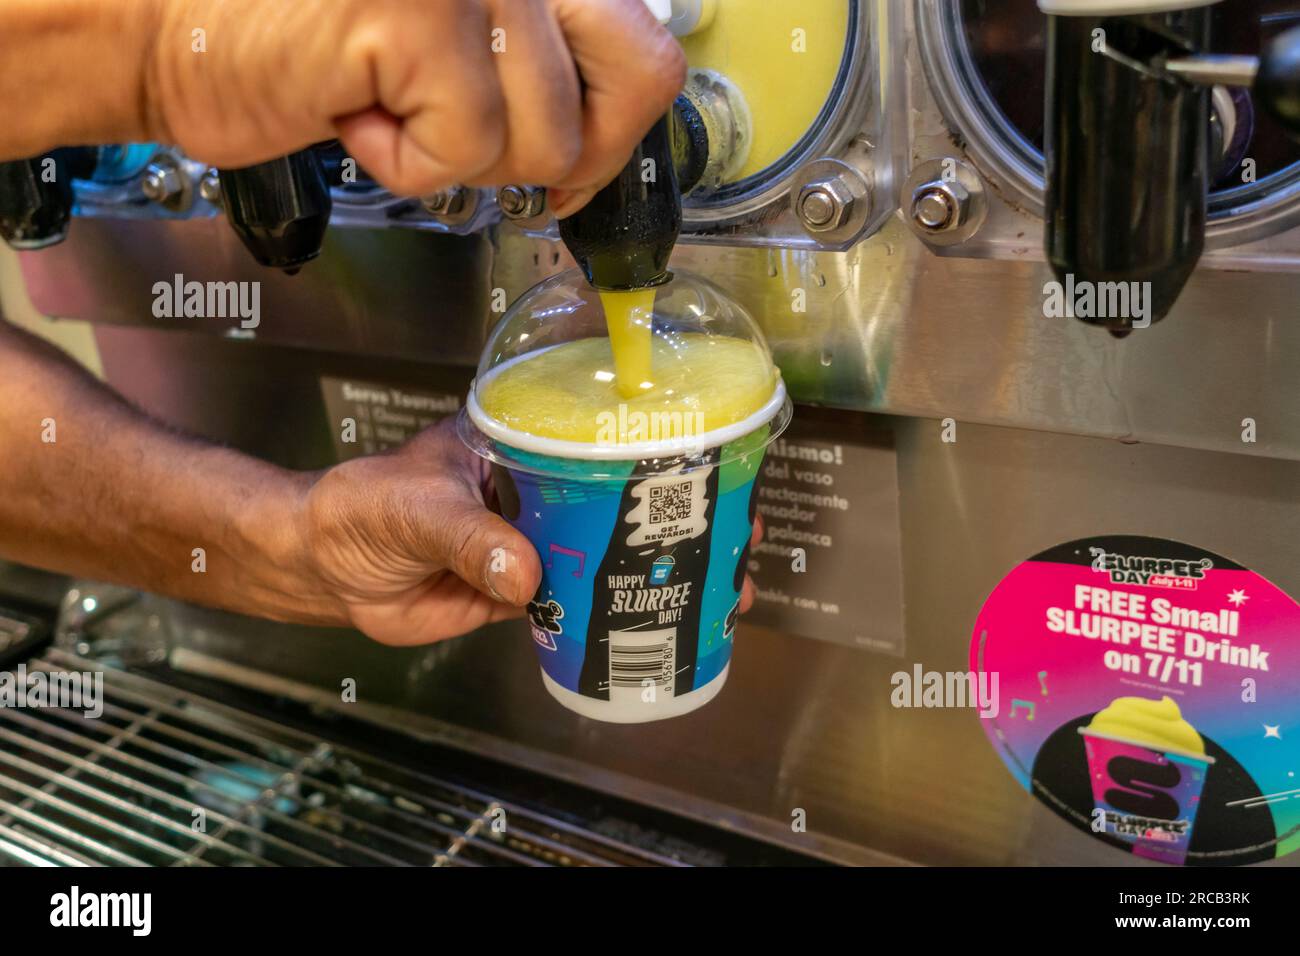 Free Slurpees are given away in a 7-Eleven store in New York on Tuesday, July 11, 2023 (7-11, get it?),the self-proclaimed holiday, Free Slurpee Day! The popular icy, slushy, syrupy drinks are available in regular and diet flavors, in combinations, and the stores have stocked up with extra barrels of syrup to meet the expected demand. According to the meticulous figures kept by 7-Eleven they sell an average of 14 million Slurpees a month and over 150 million Slurpees a year.  (© Richard B. Levine) Stock Photo